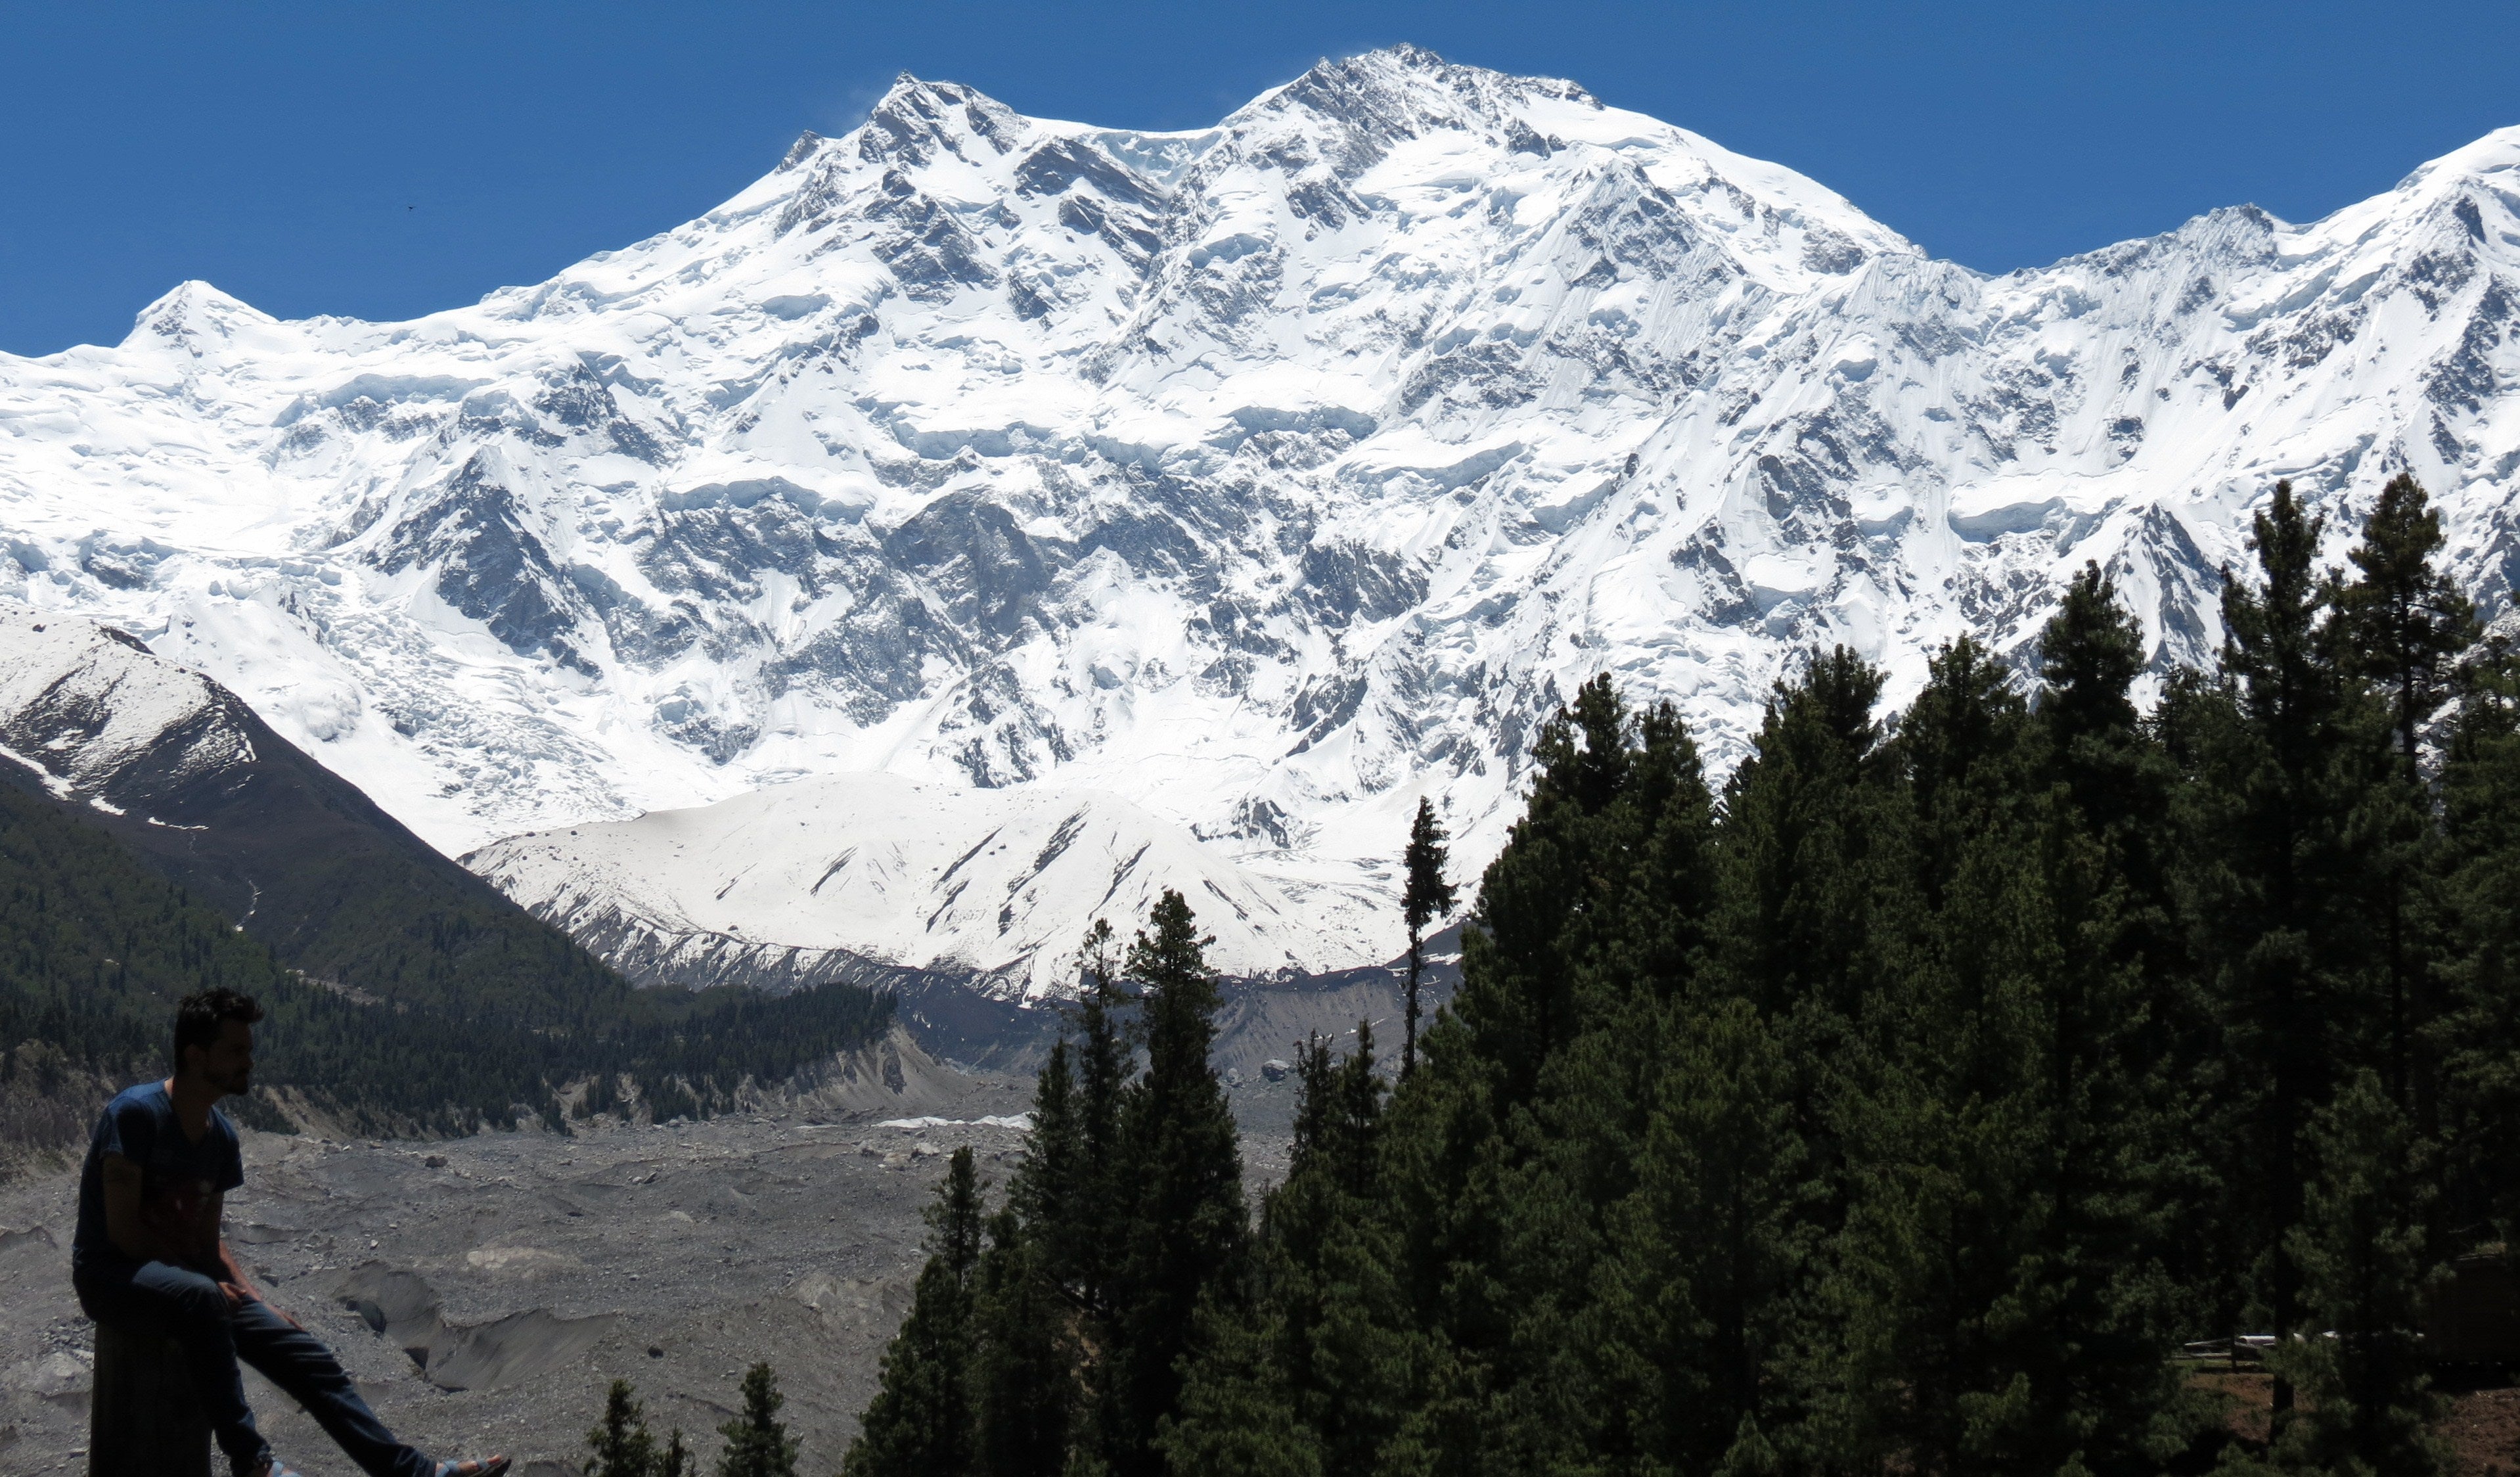 A view of Nanga Parbat, Pakistan’s second-highest mountain, on which Messner’s brother Gunther died